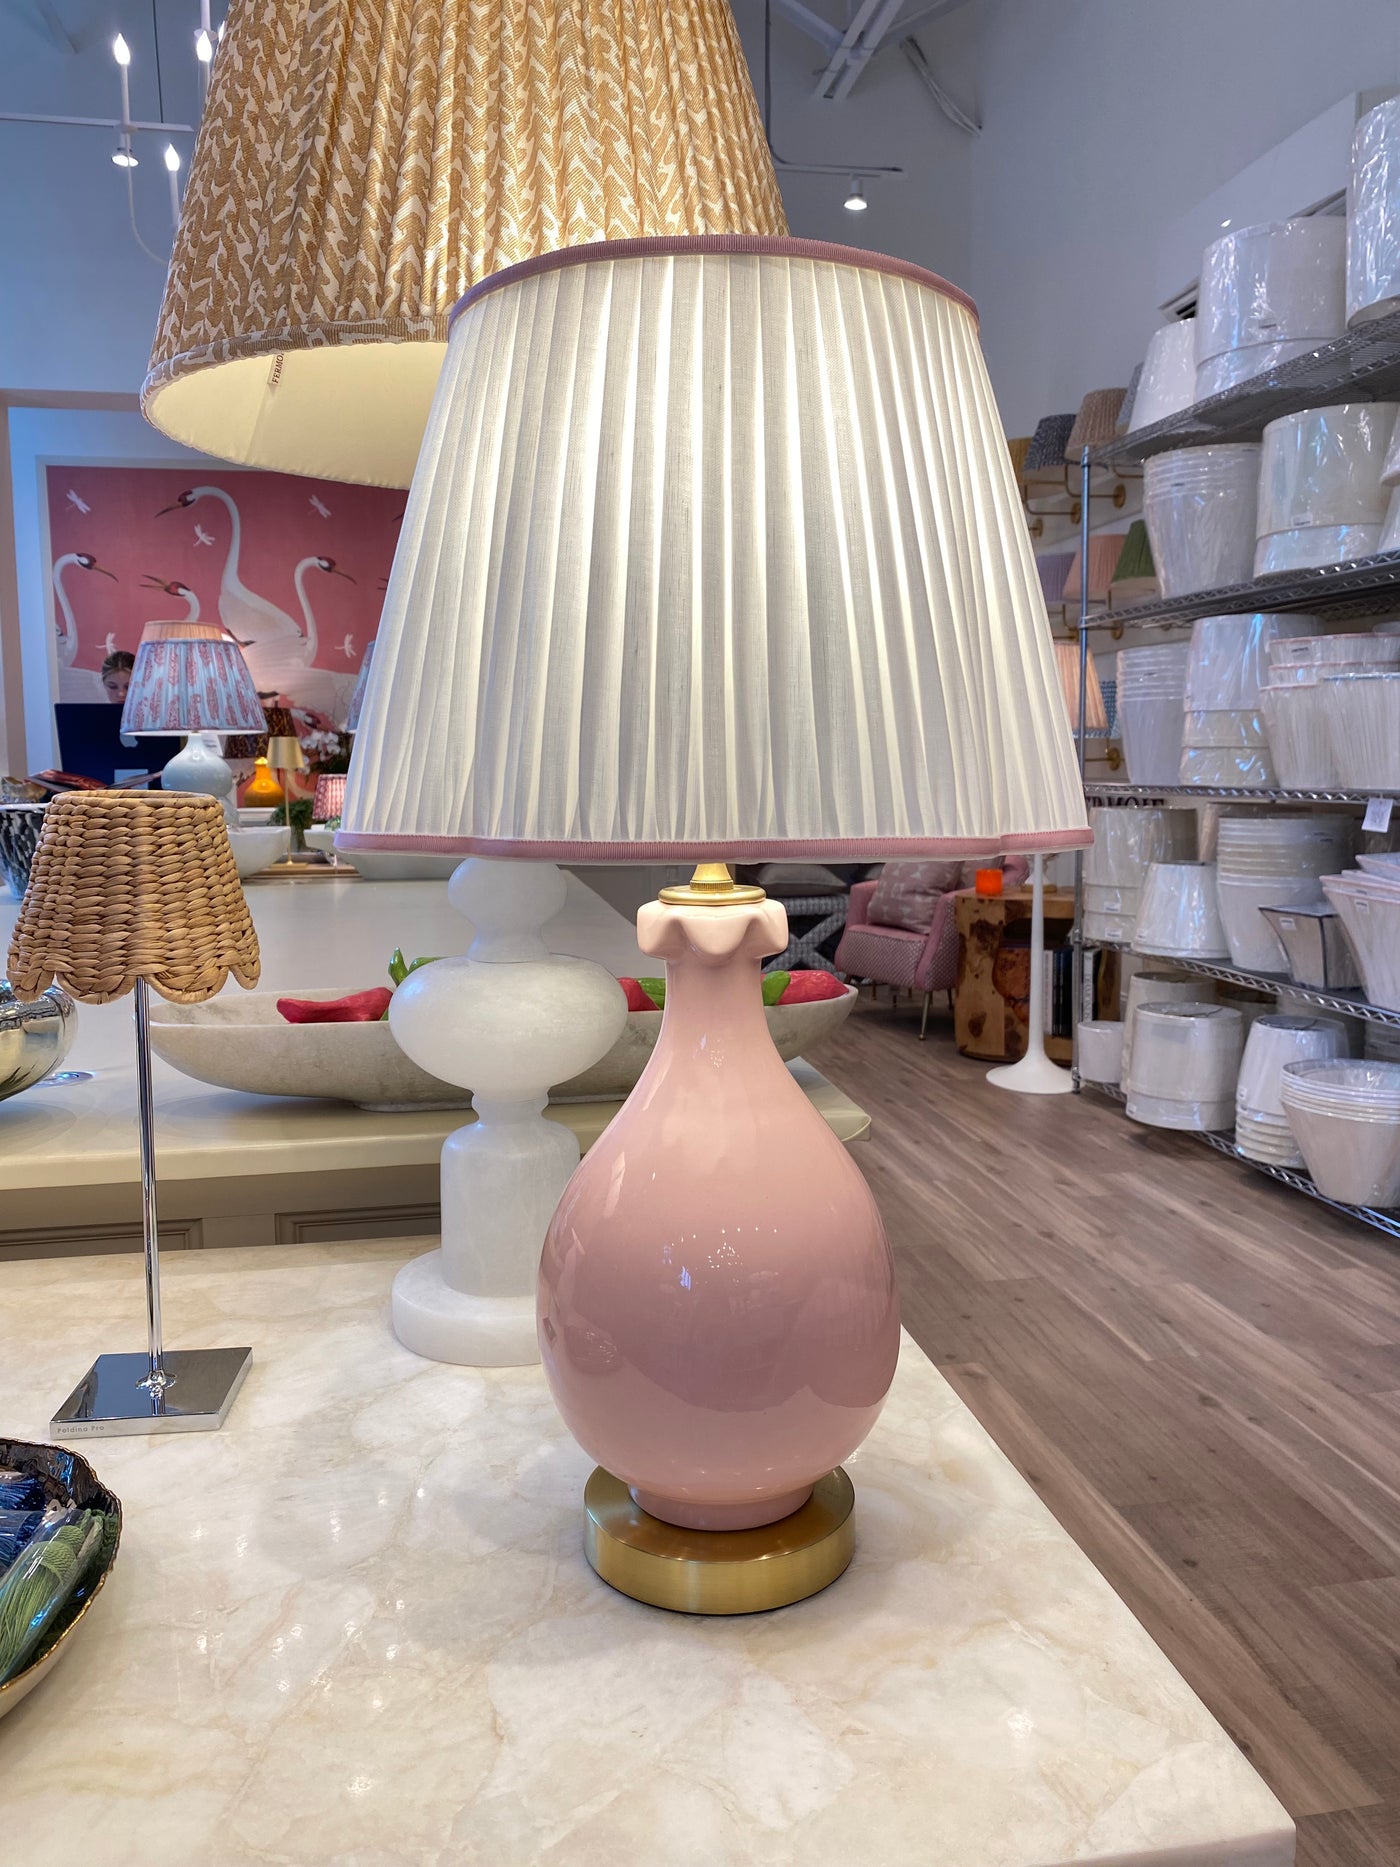 Scalloped lampshade on a pink petal lamp